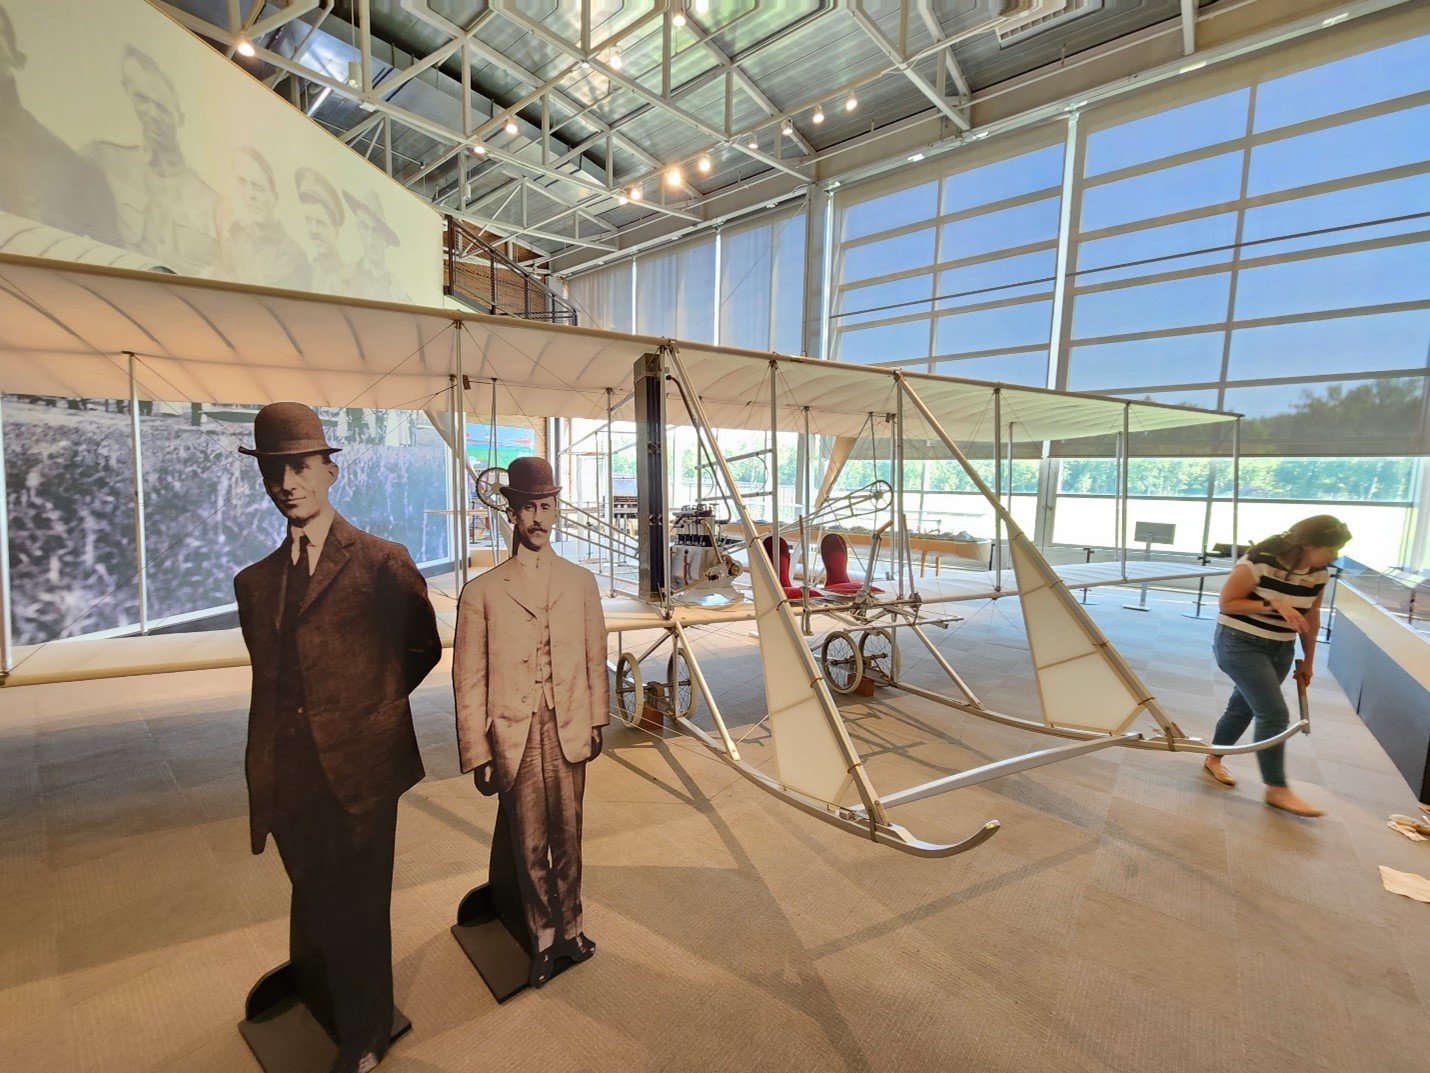 The “metallic” look of the Wright Model B aircraft explained.